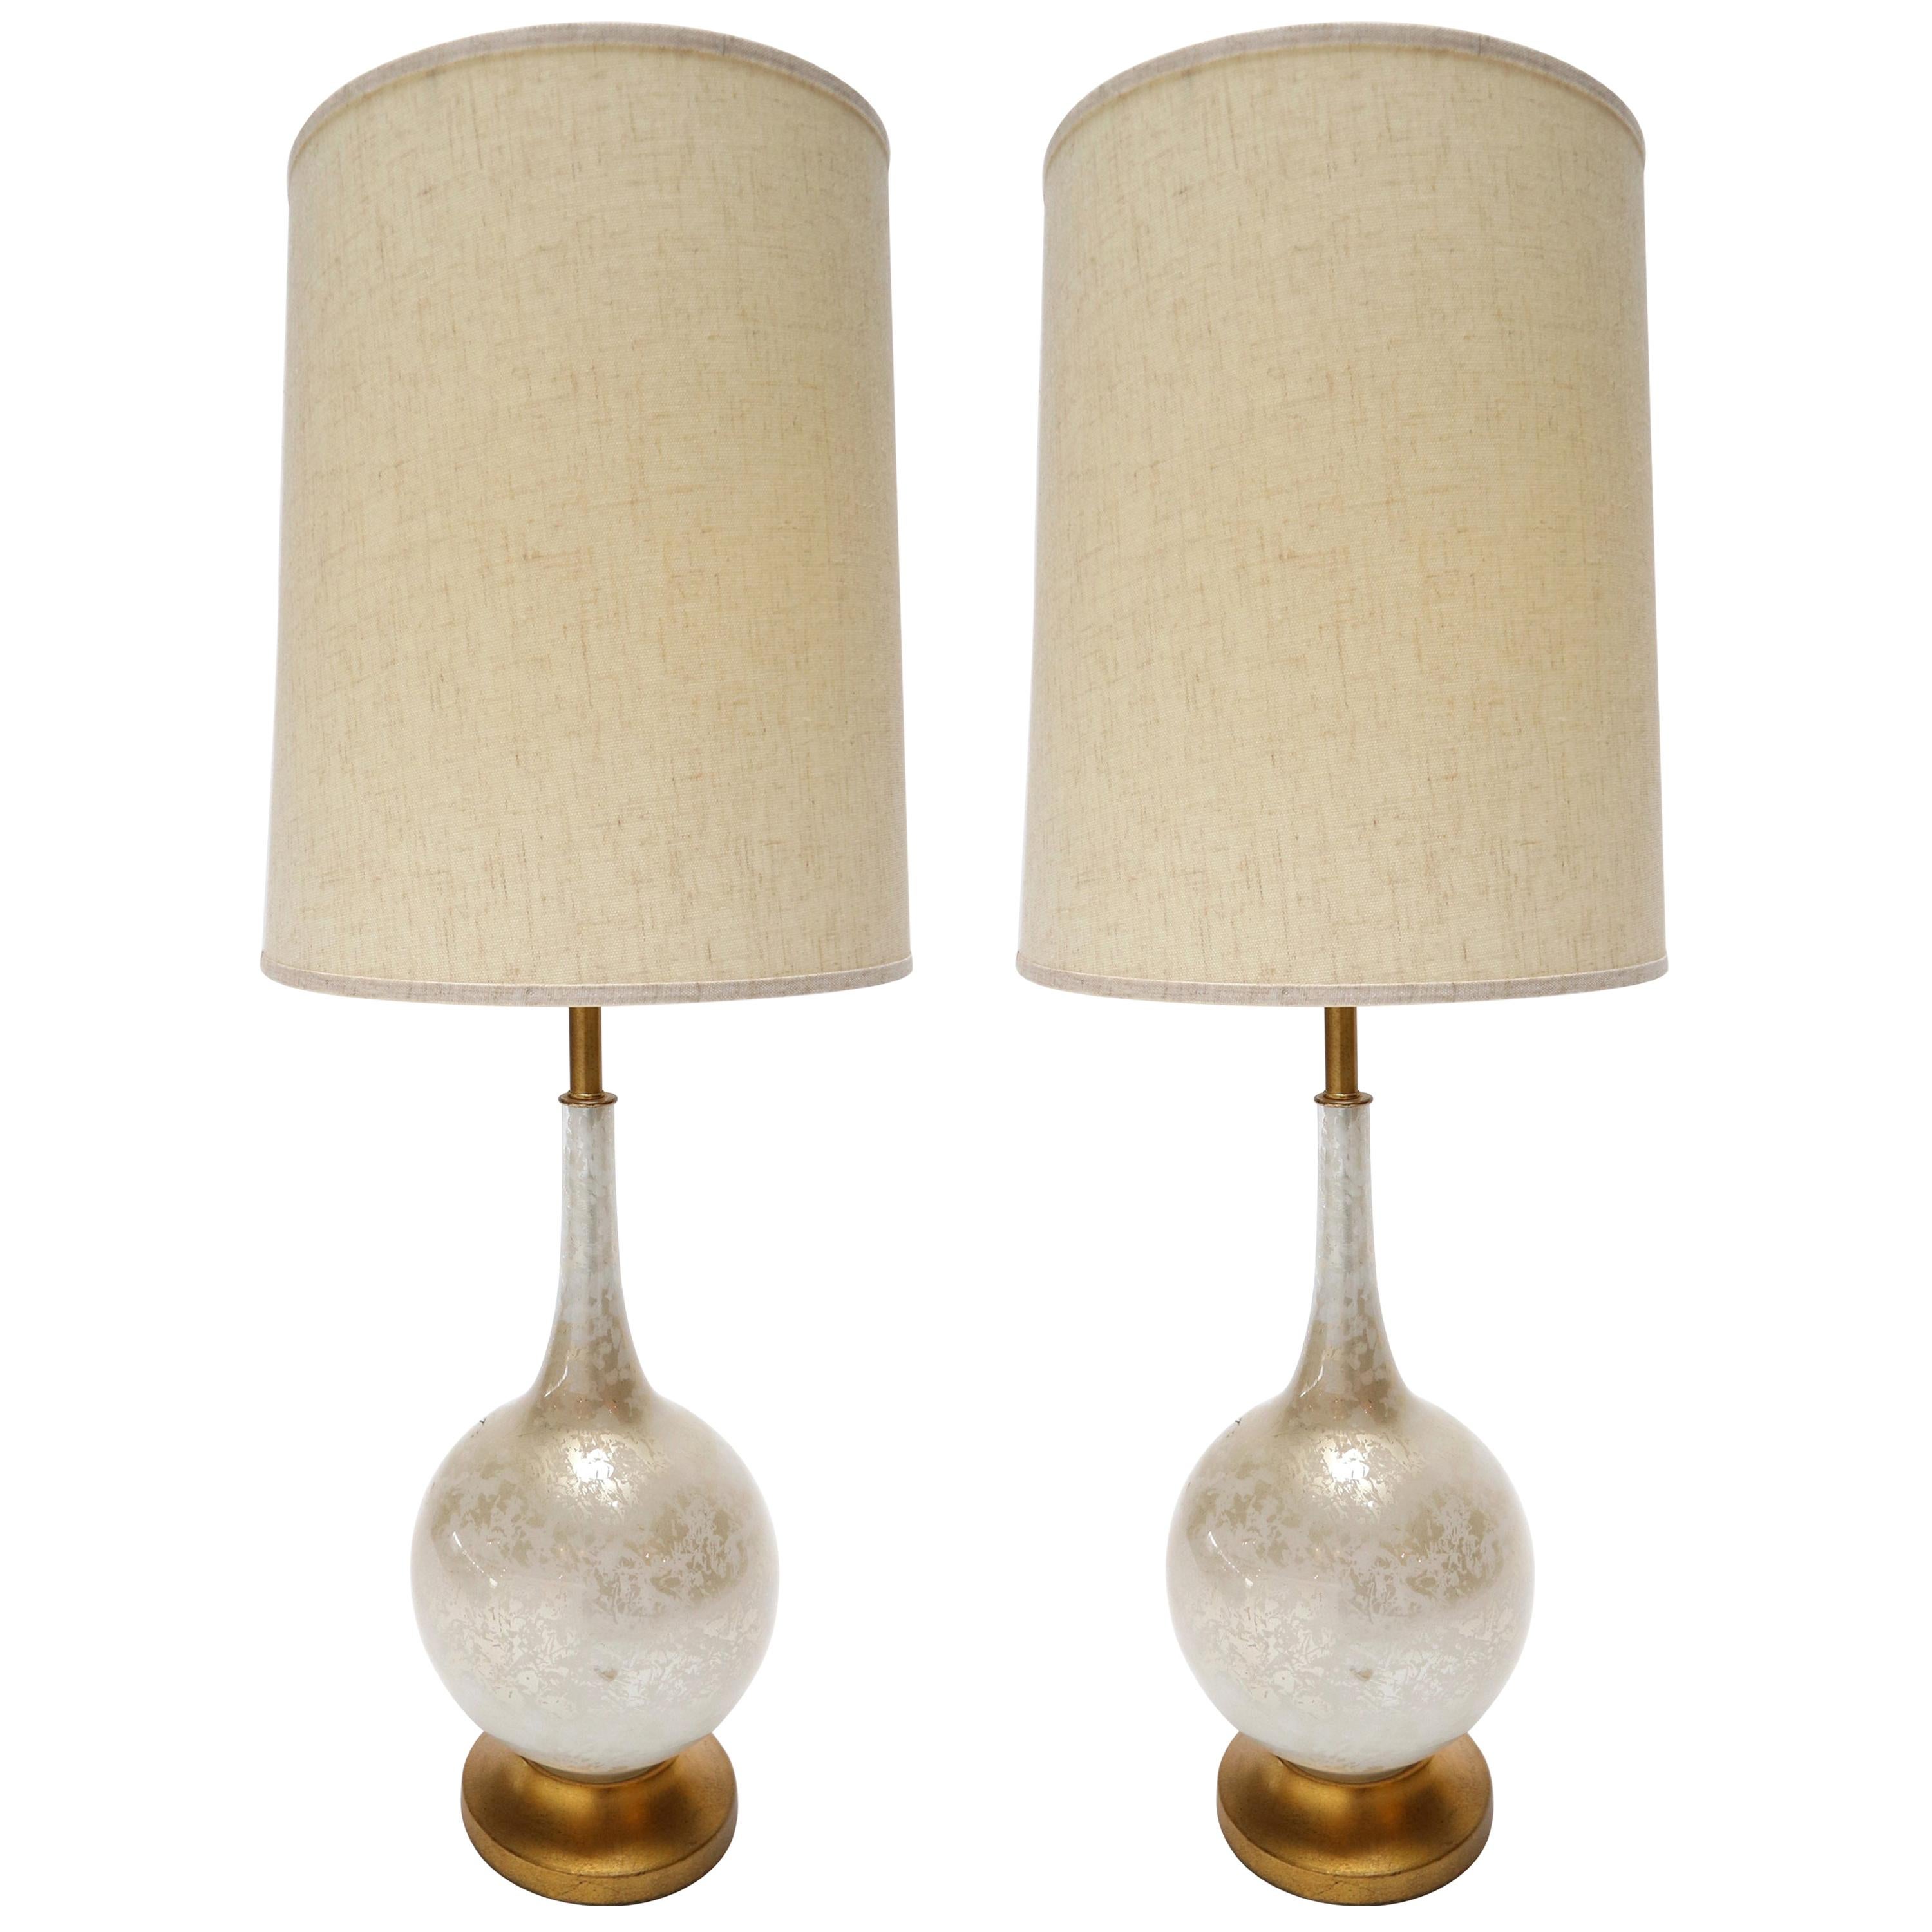 Pair of 1960s Murano White Glass Table Lamps with Brass Base